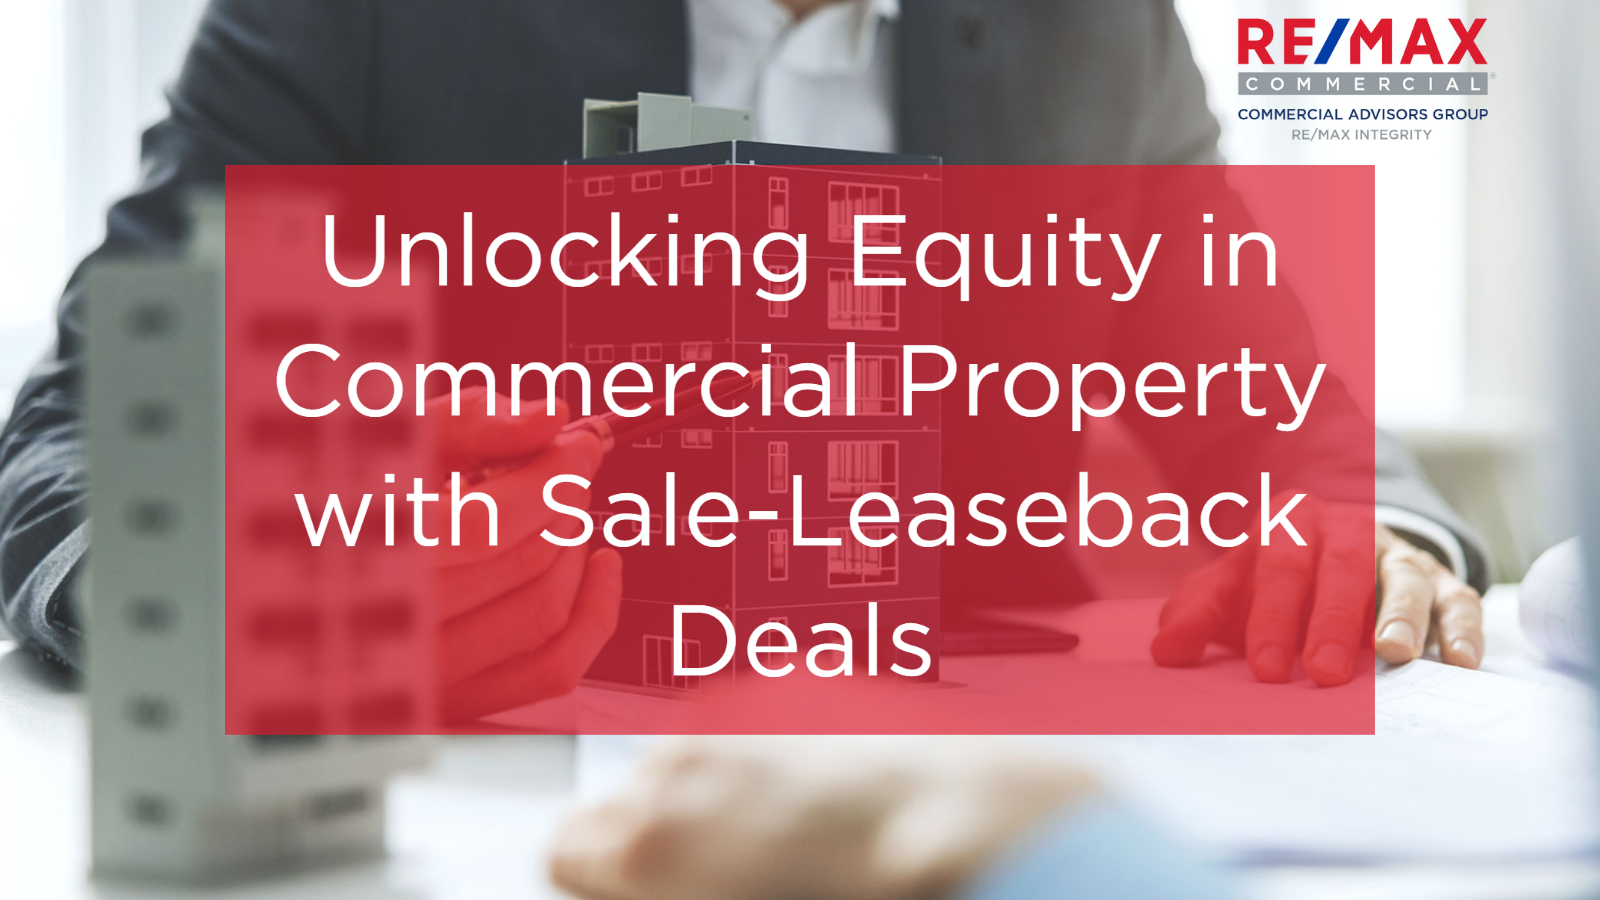 Unlocking Equity in Commercial Property with Sale-Leaseback Deals-125